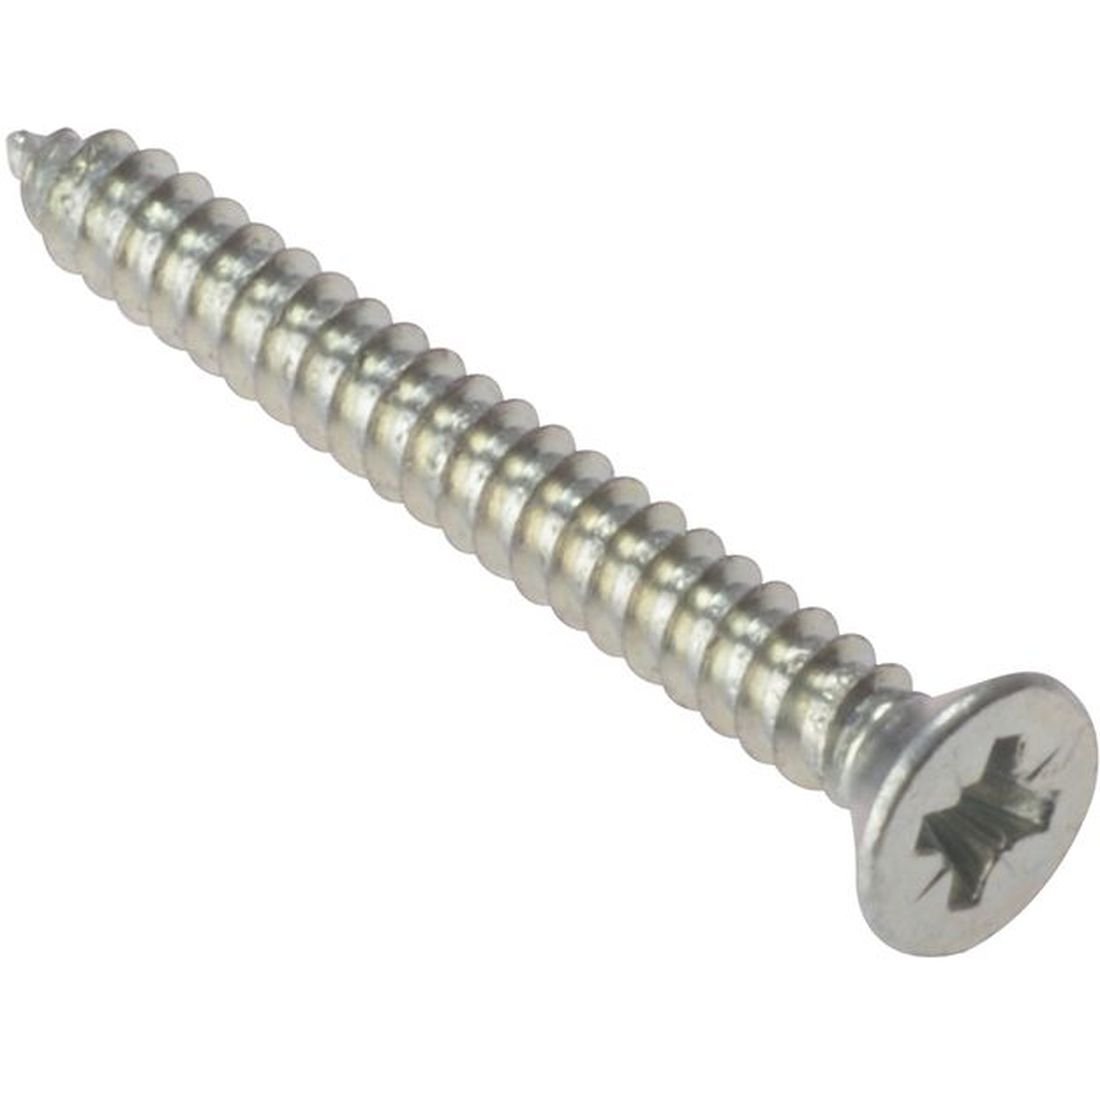 ForgeFix Self-Tapping Screw Pozi Compatible CSK ZP 1.1/2in x 8 Box 200                   